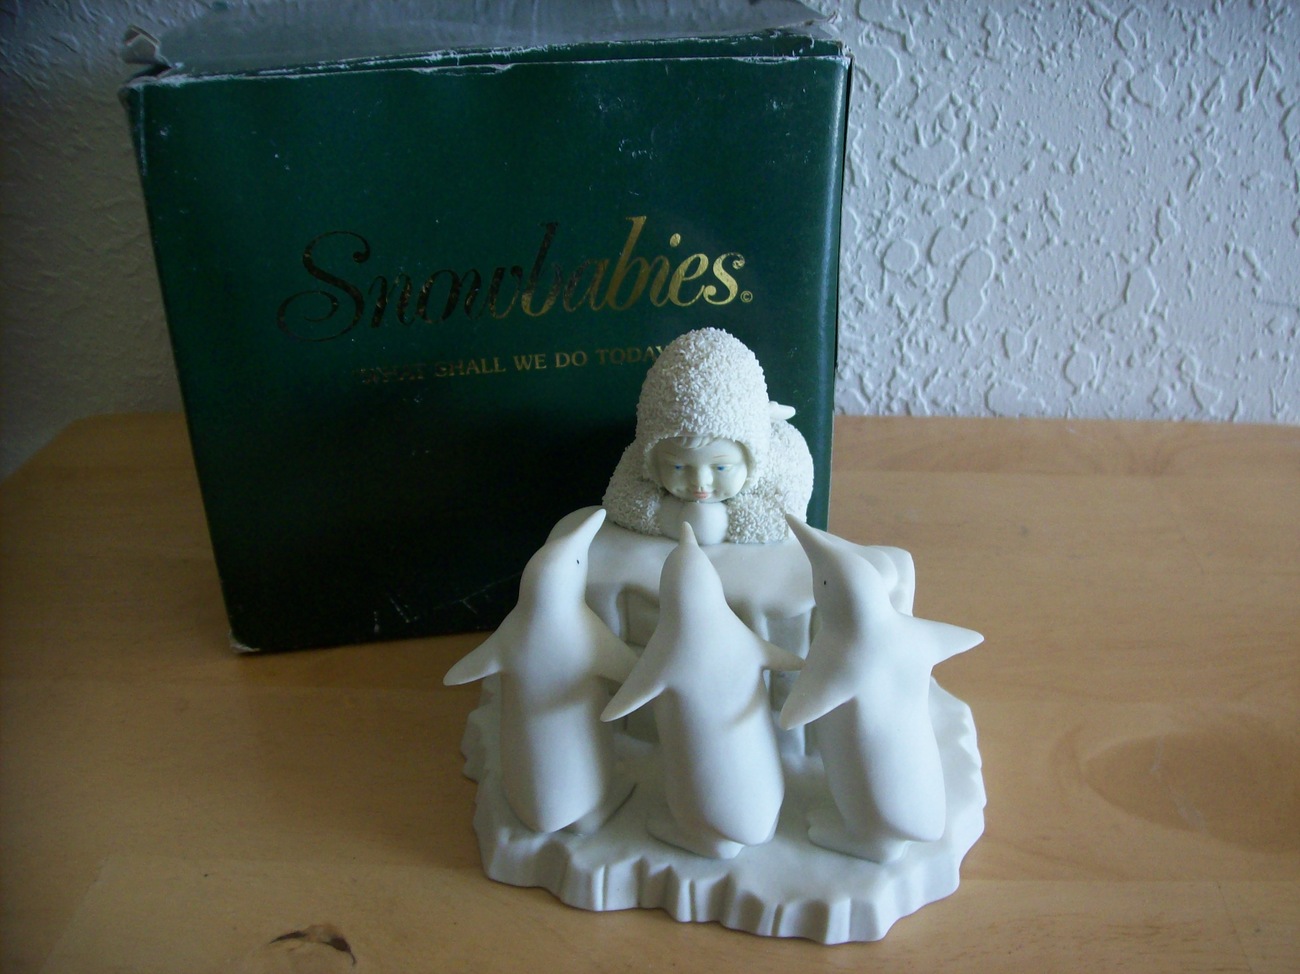 Primary image for Dept. 56 1995 Snowbabies “What Shall We Do Today” Figurine 